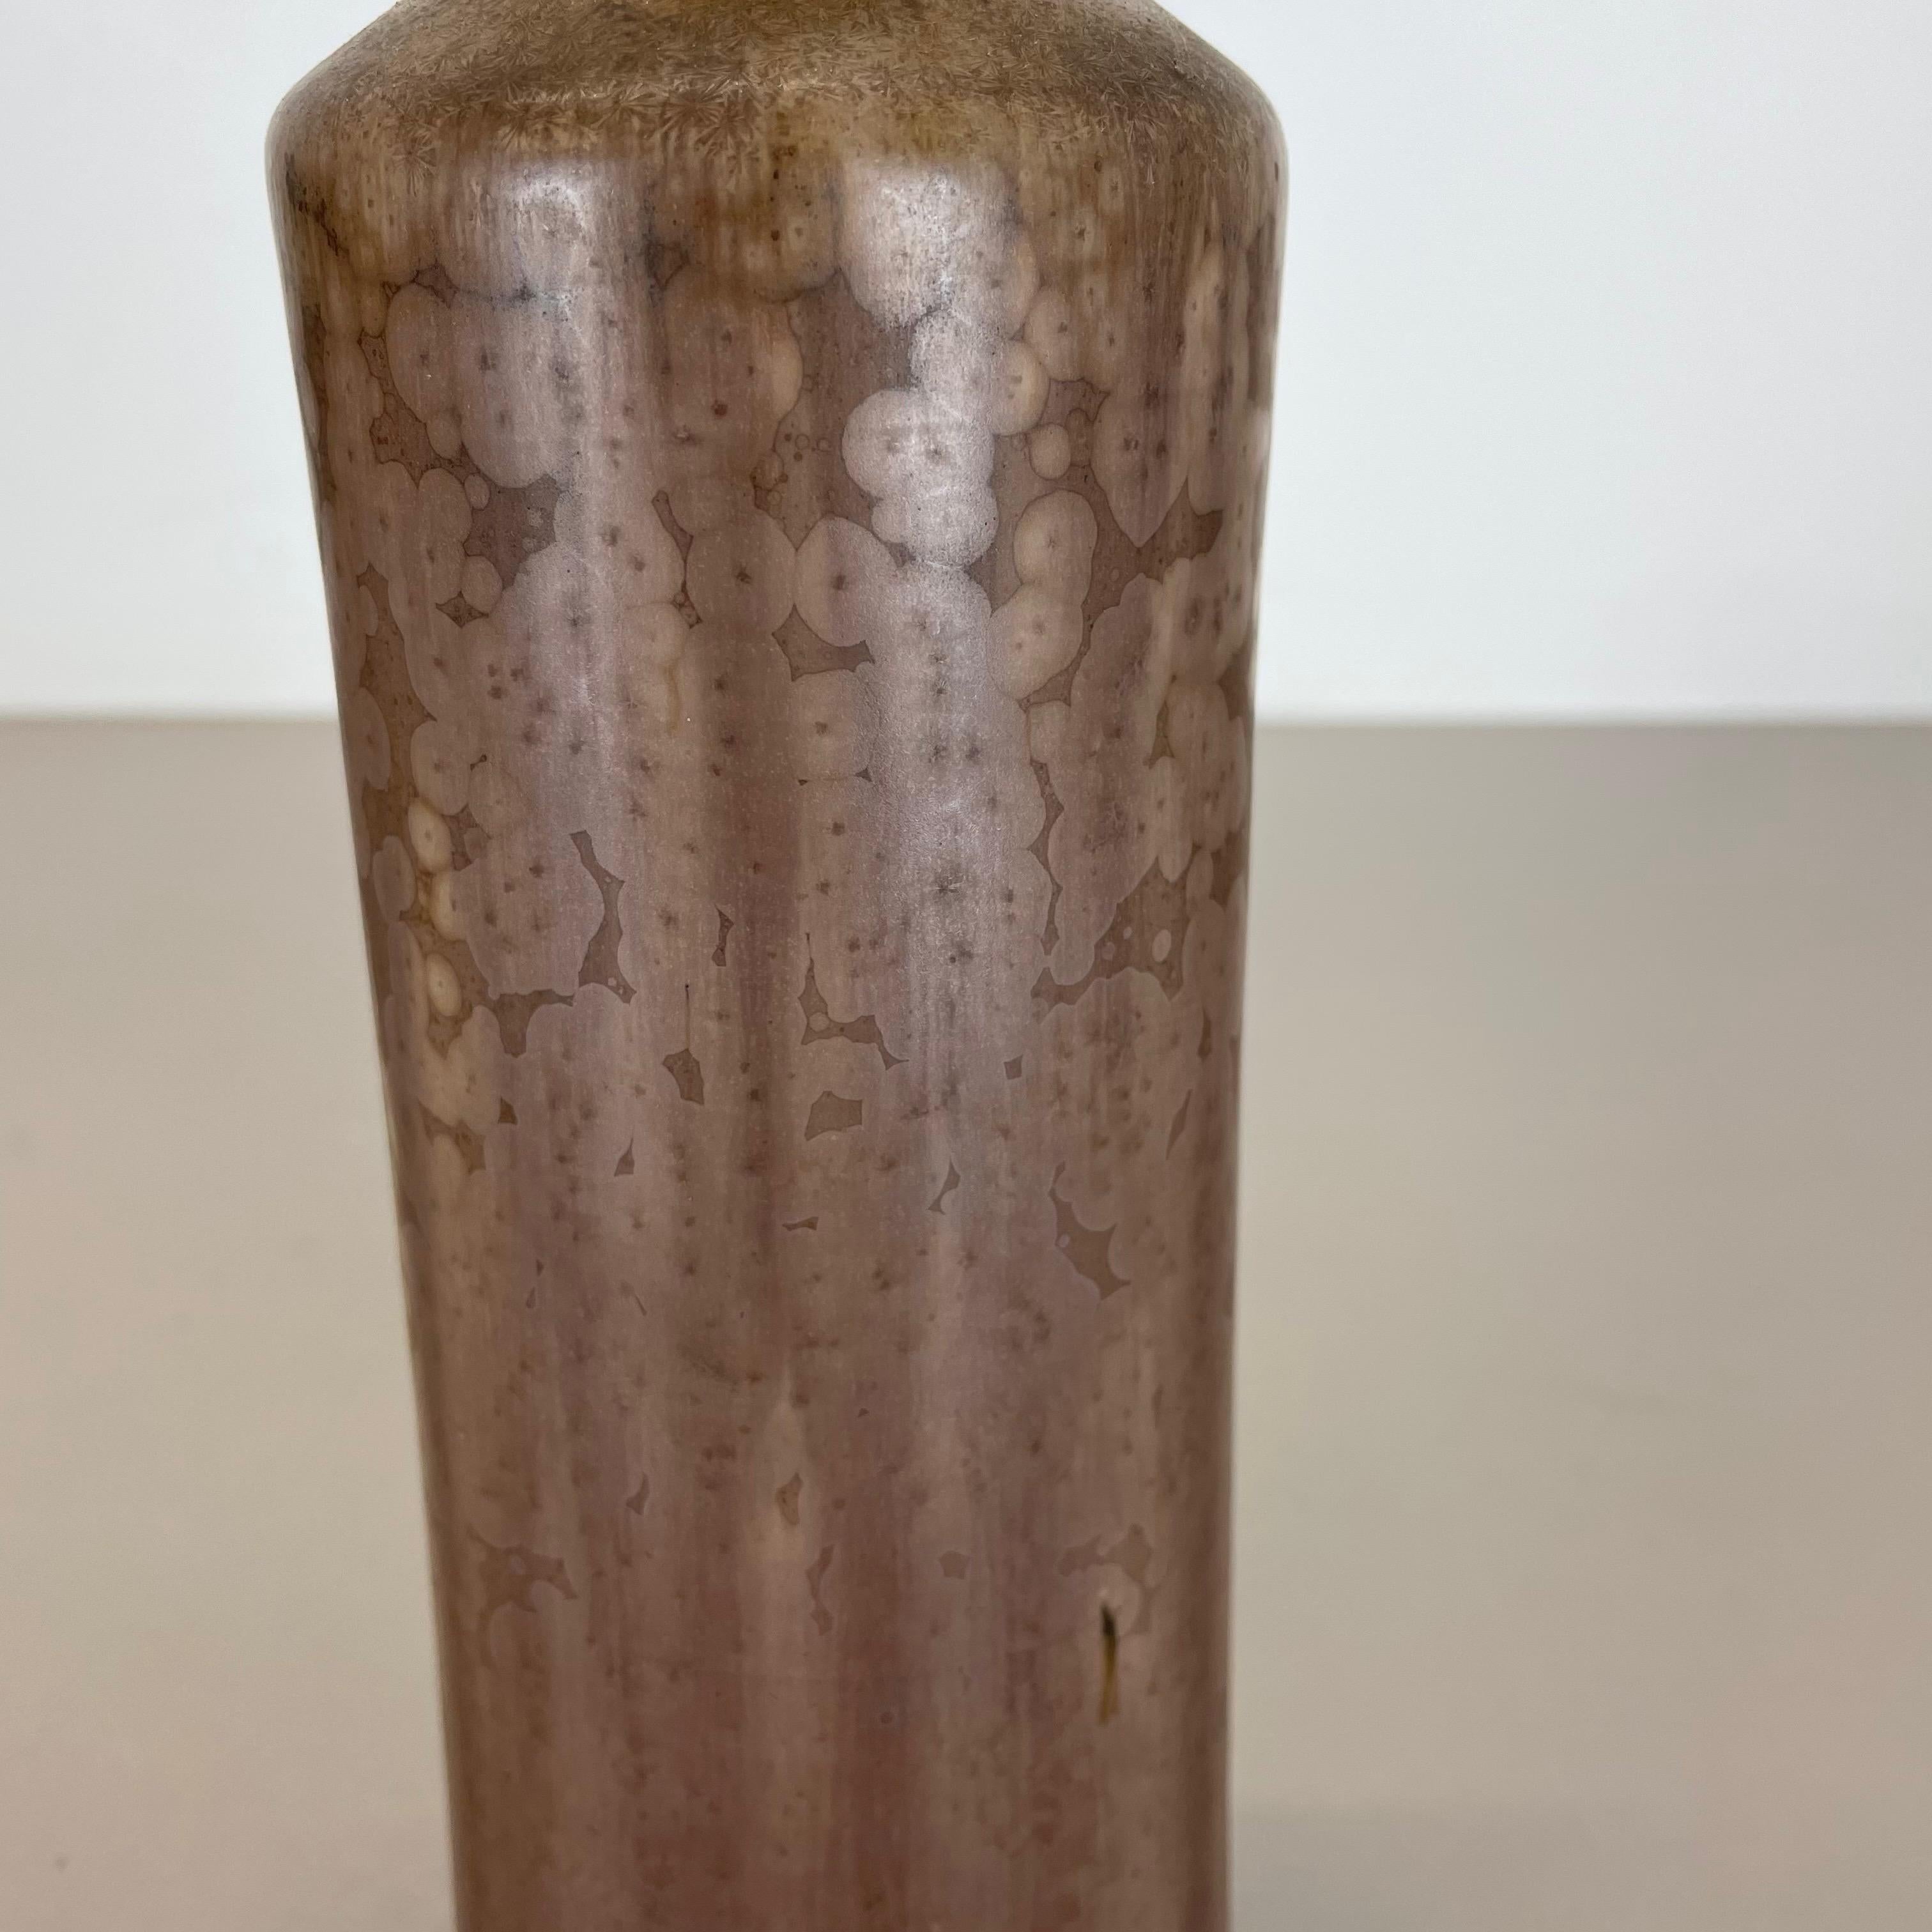 Abstract Ceramic Studio Vase Object by Wendelin Stahl, Germany, 1970s For Sale 7